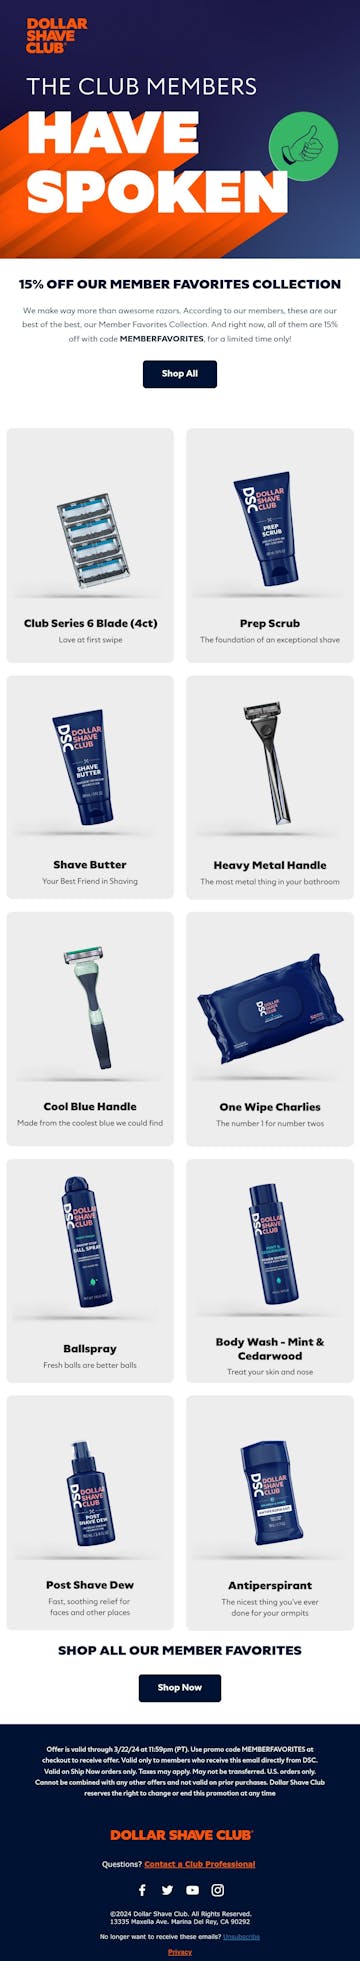 Dollar Shave Club Email Design Thumbnail Preview